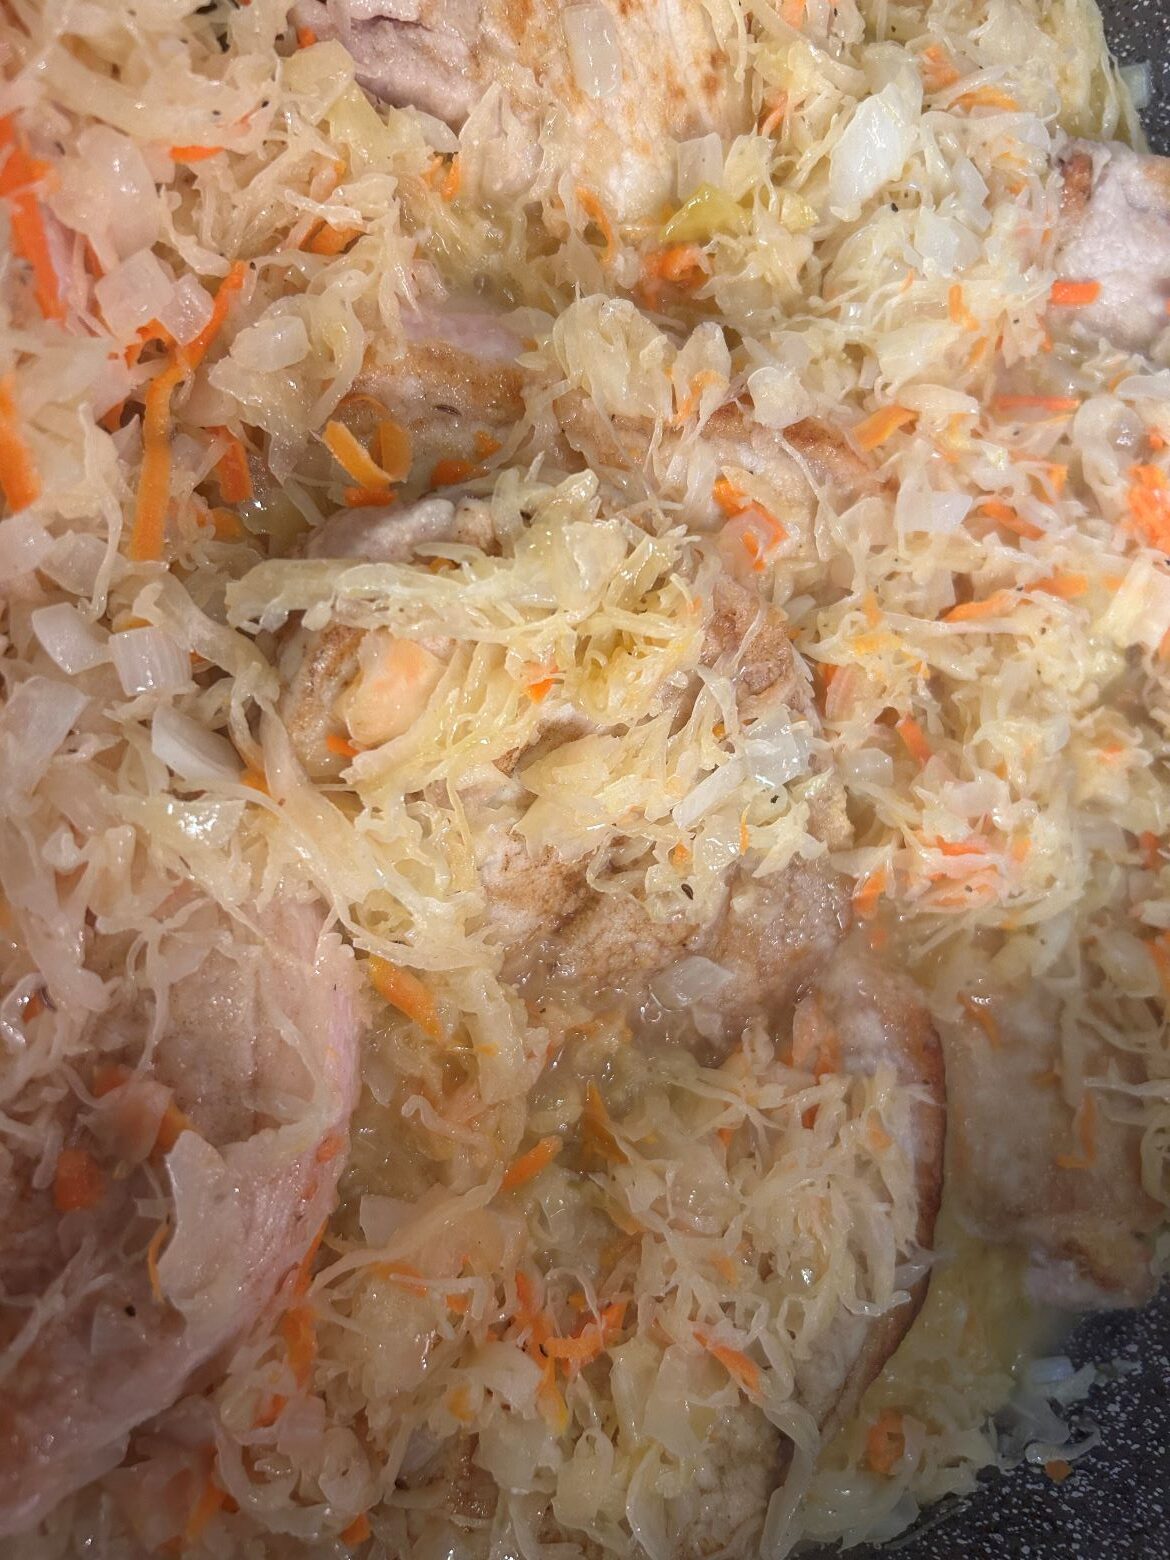 Kat's tangy sauerkraut and flavorful pork with the tiny carrot slices and seasoning visible in natural juices in the pan used to make it.